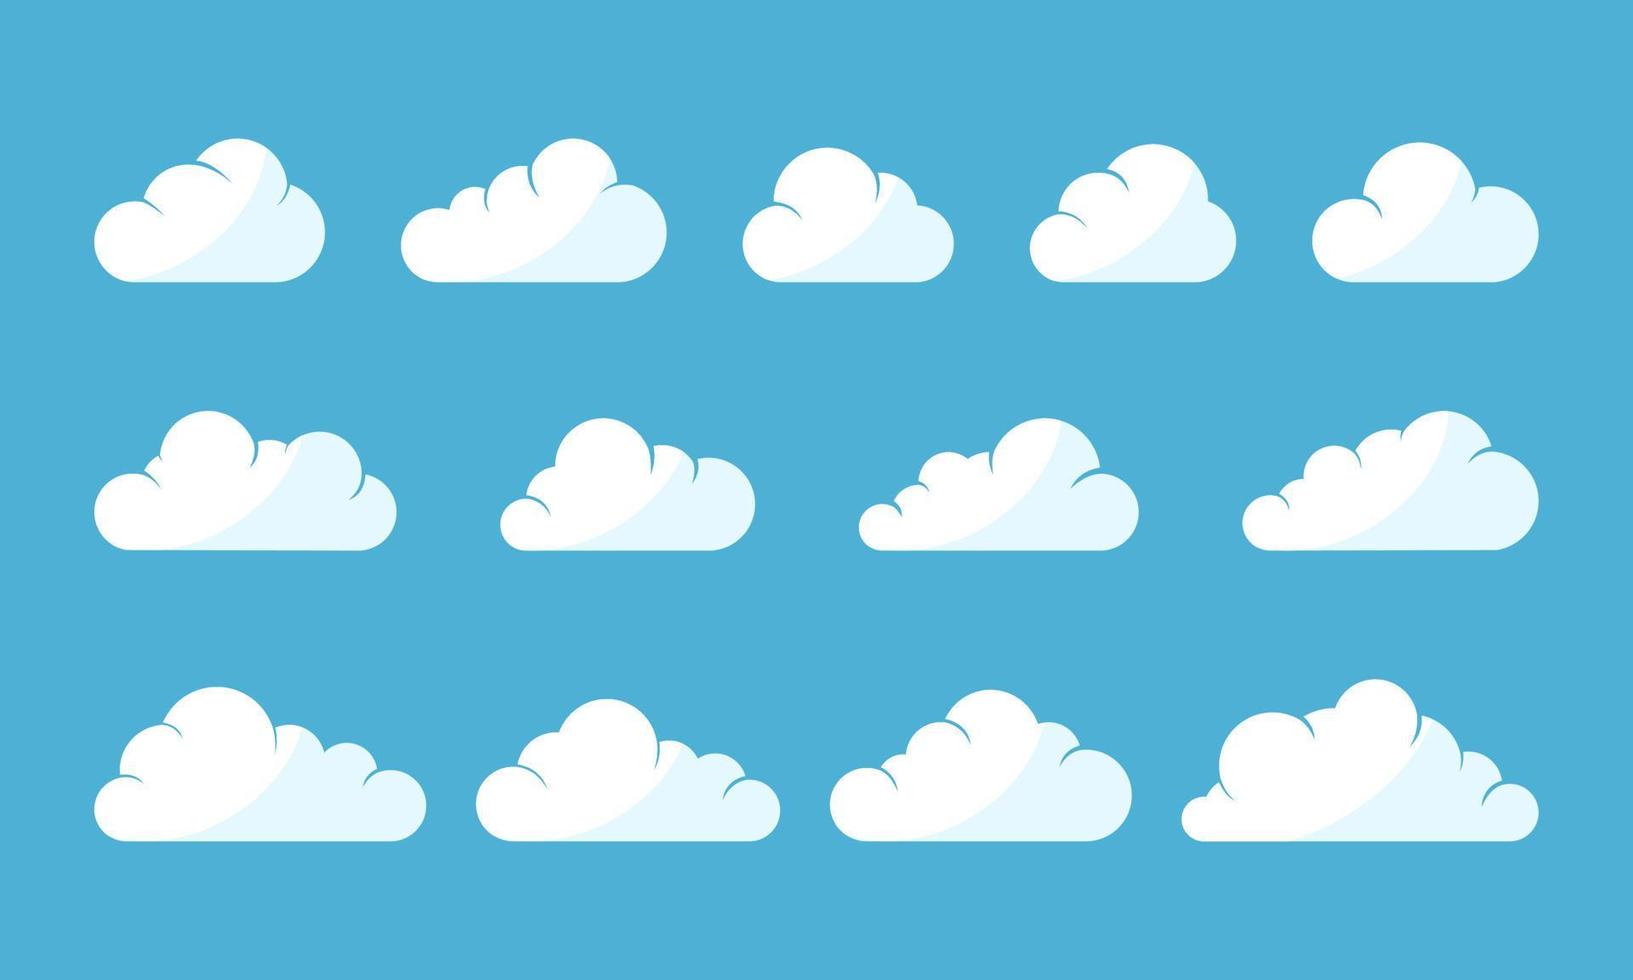 Different shapes of white clouds on the blue background. Cloud icons. Vector illustration.